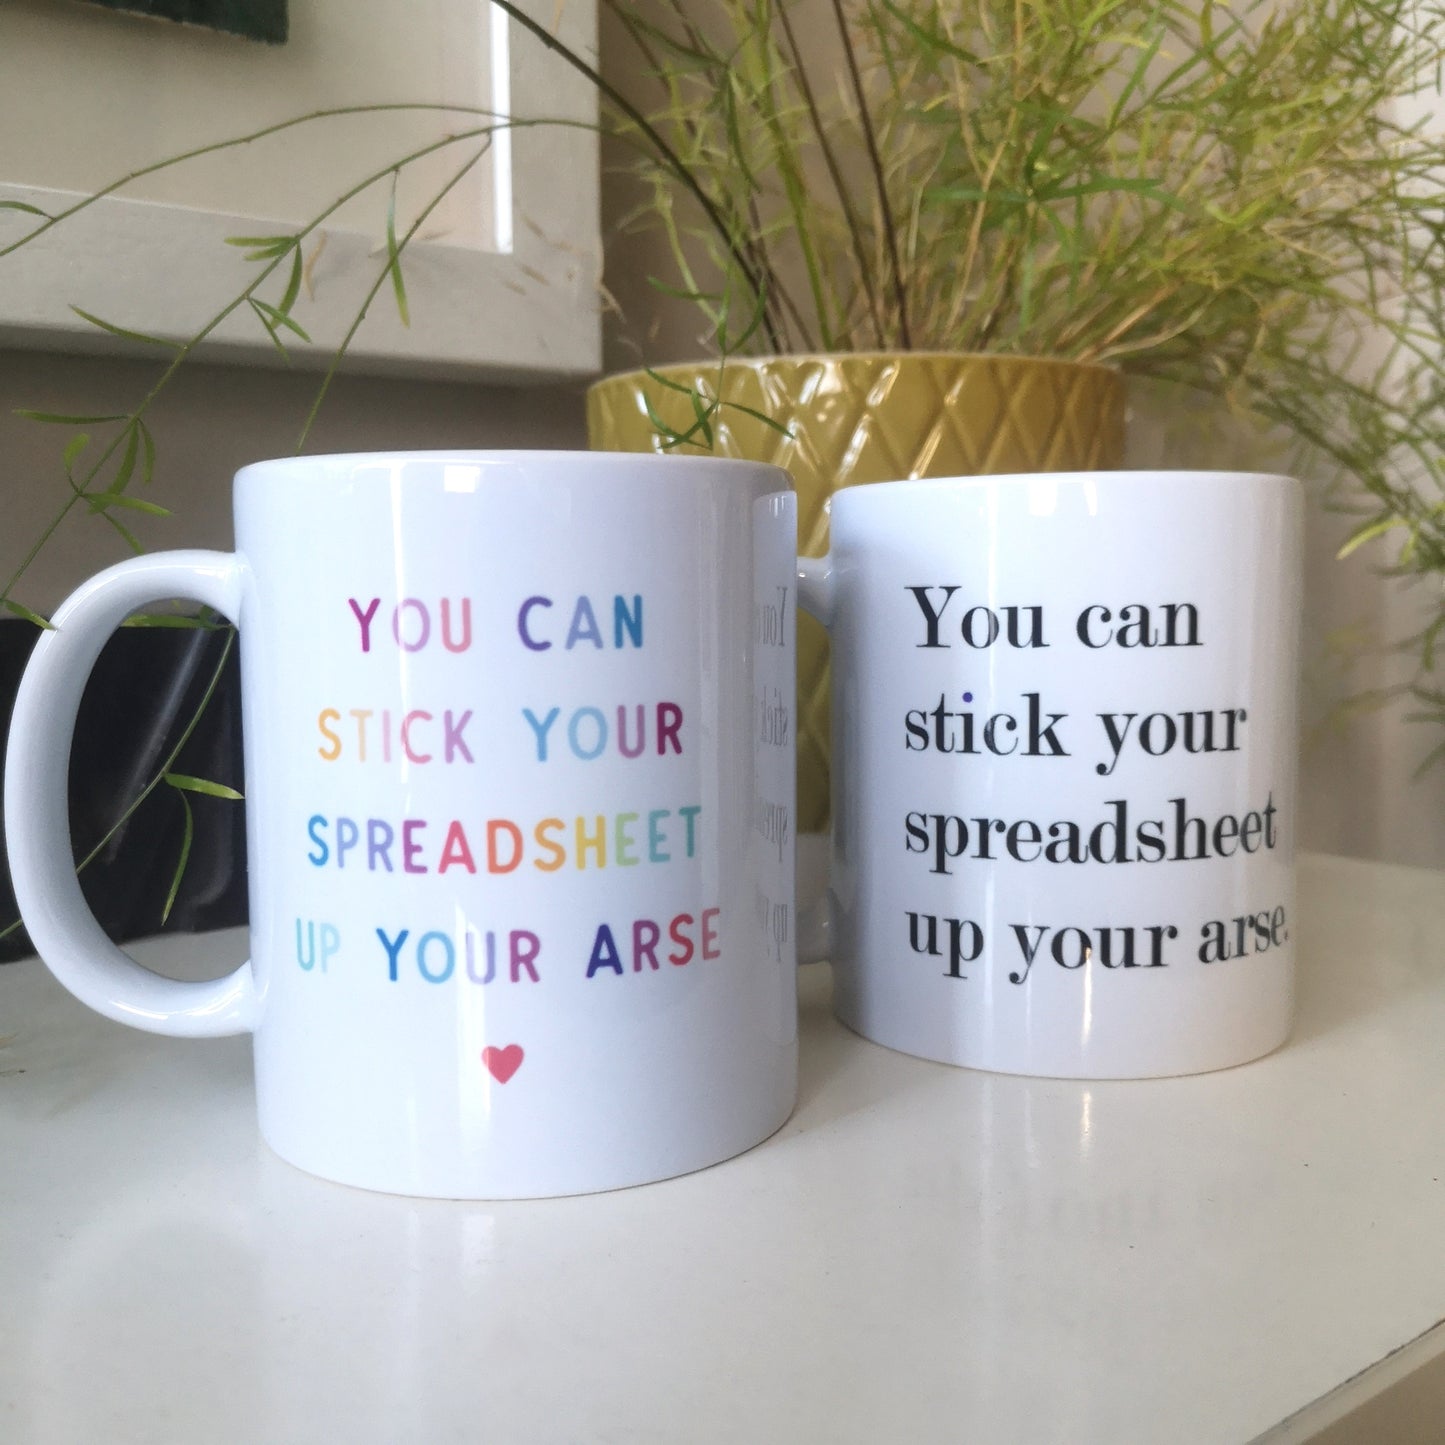 YOU CAN STICK YOUR SPREADSHEET UP YOUR ... Black / White Ceramic Mug